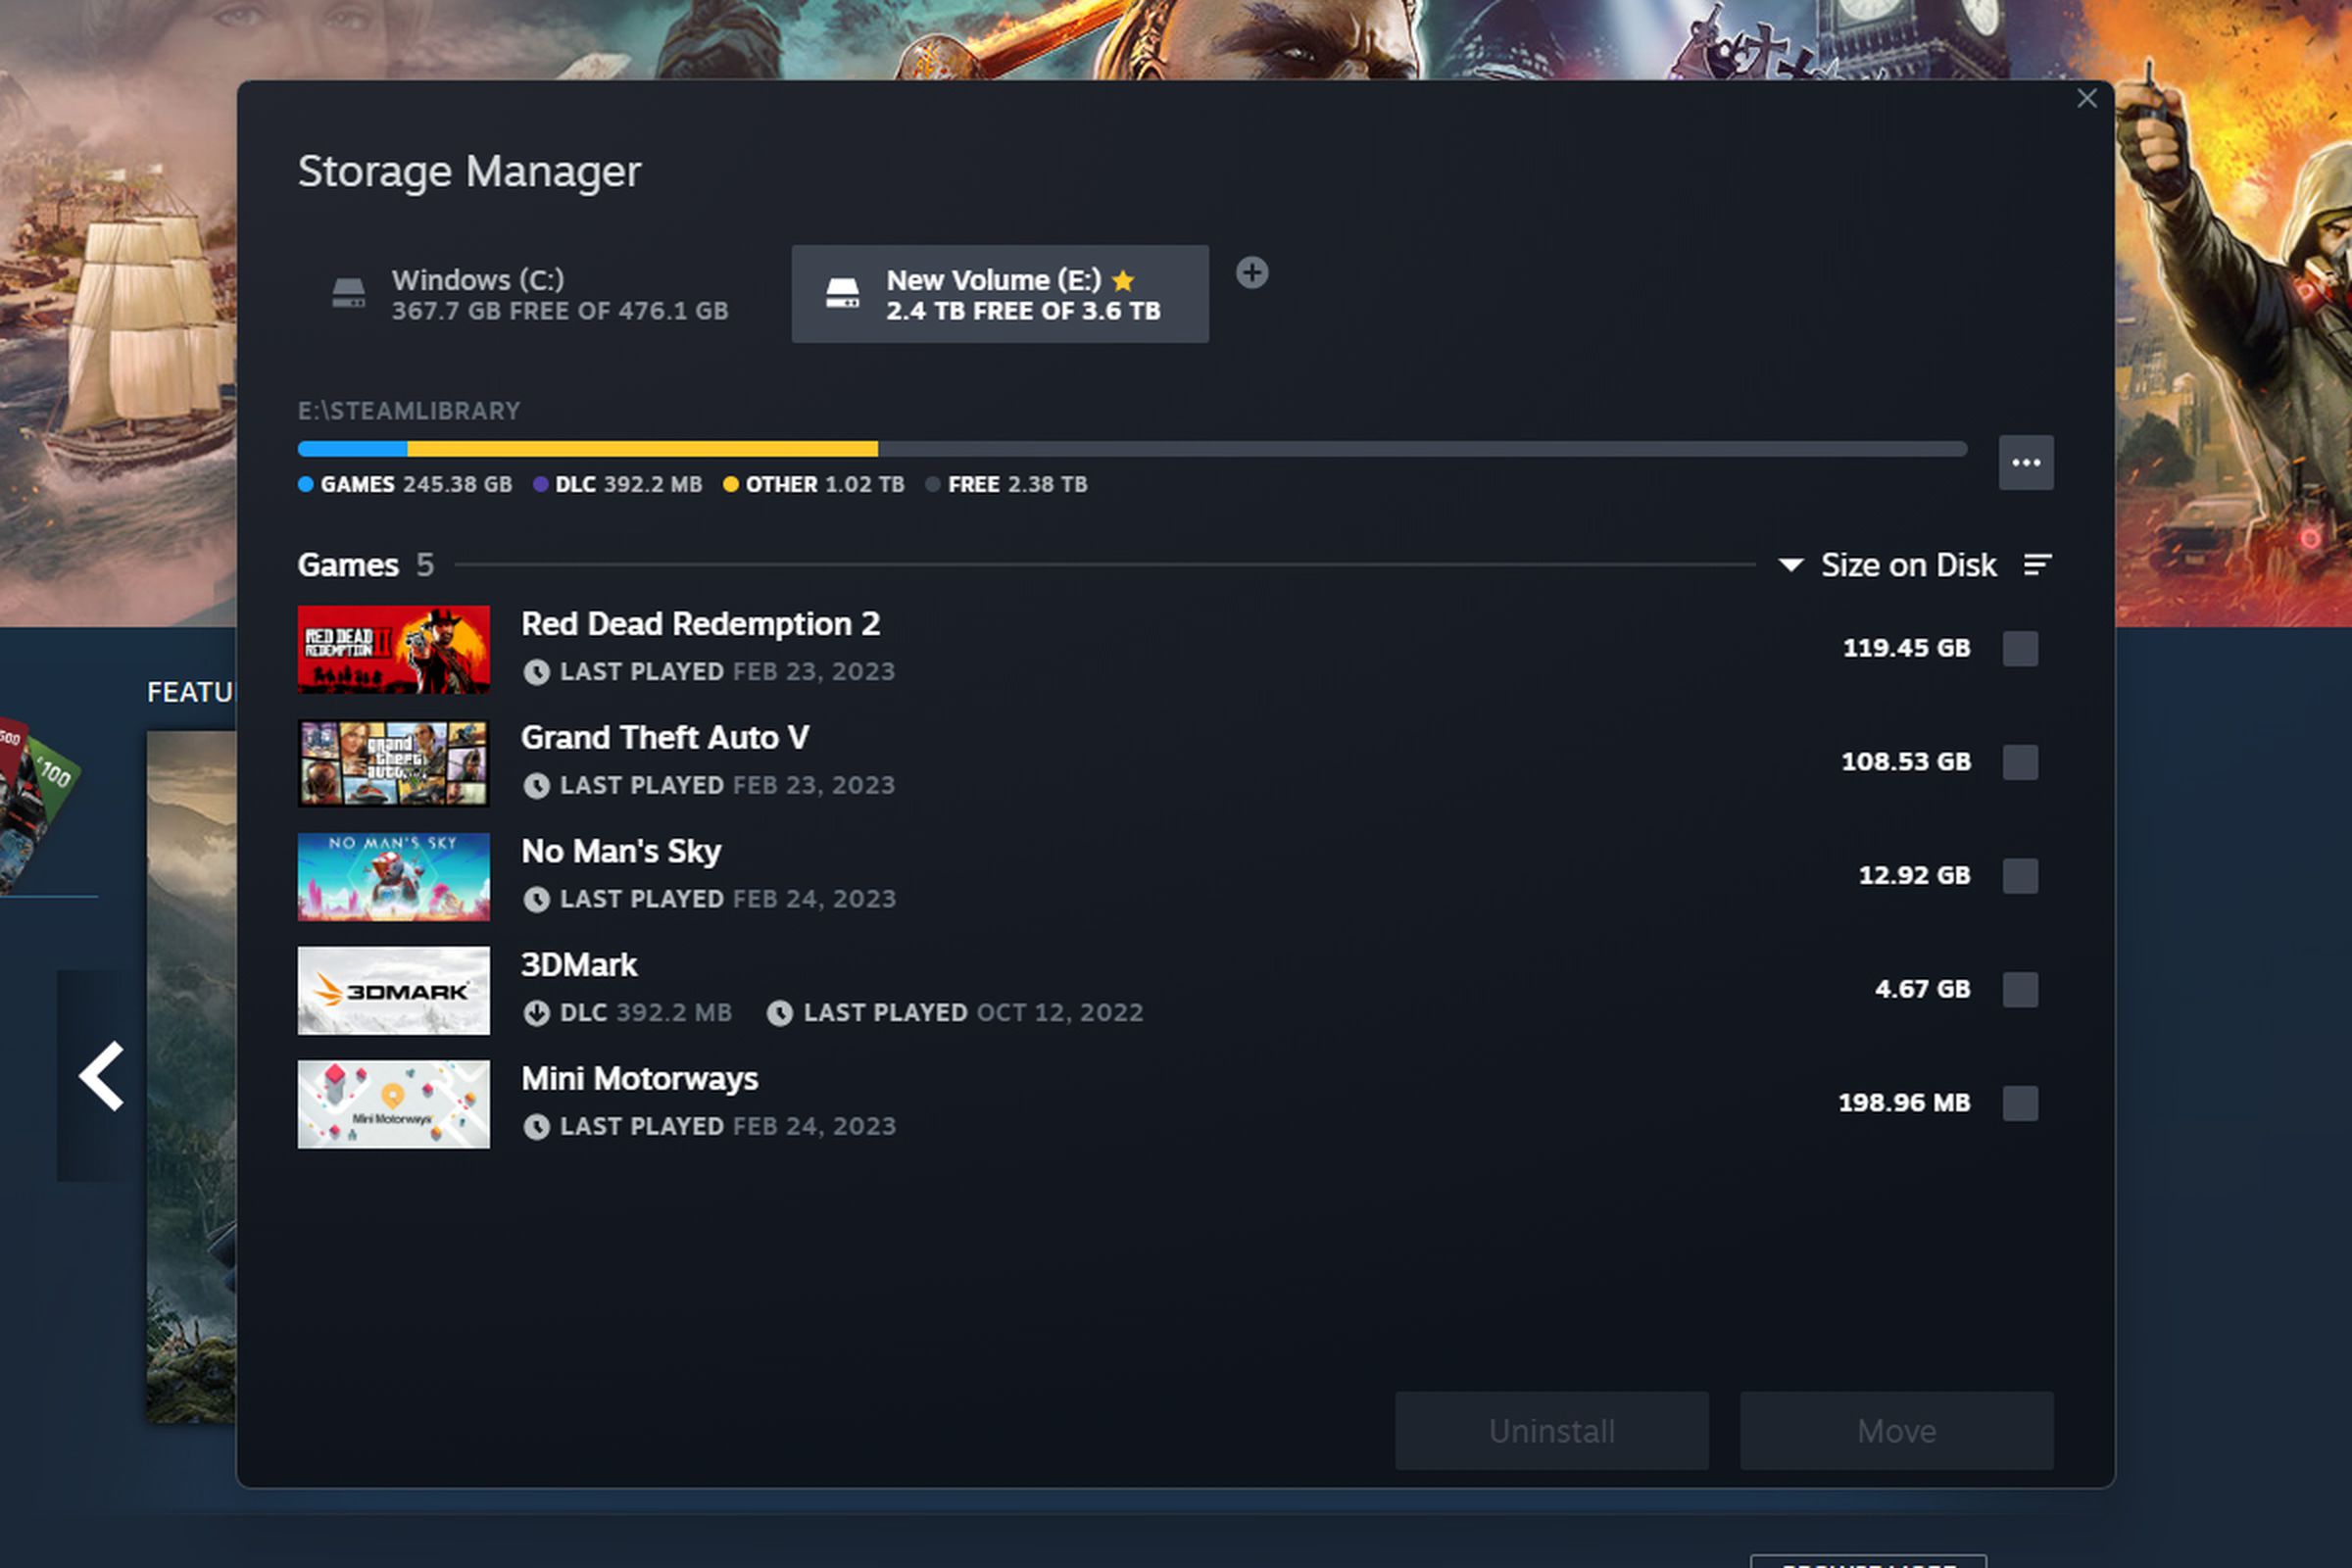 Pop-up windows titled Storage Manager with a line that shows how much disk space is being used and a list of games with their covers and names on the left, and size on disk on the right.